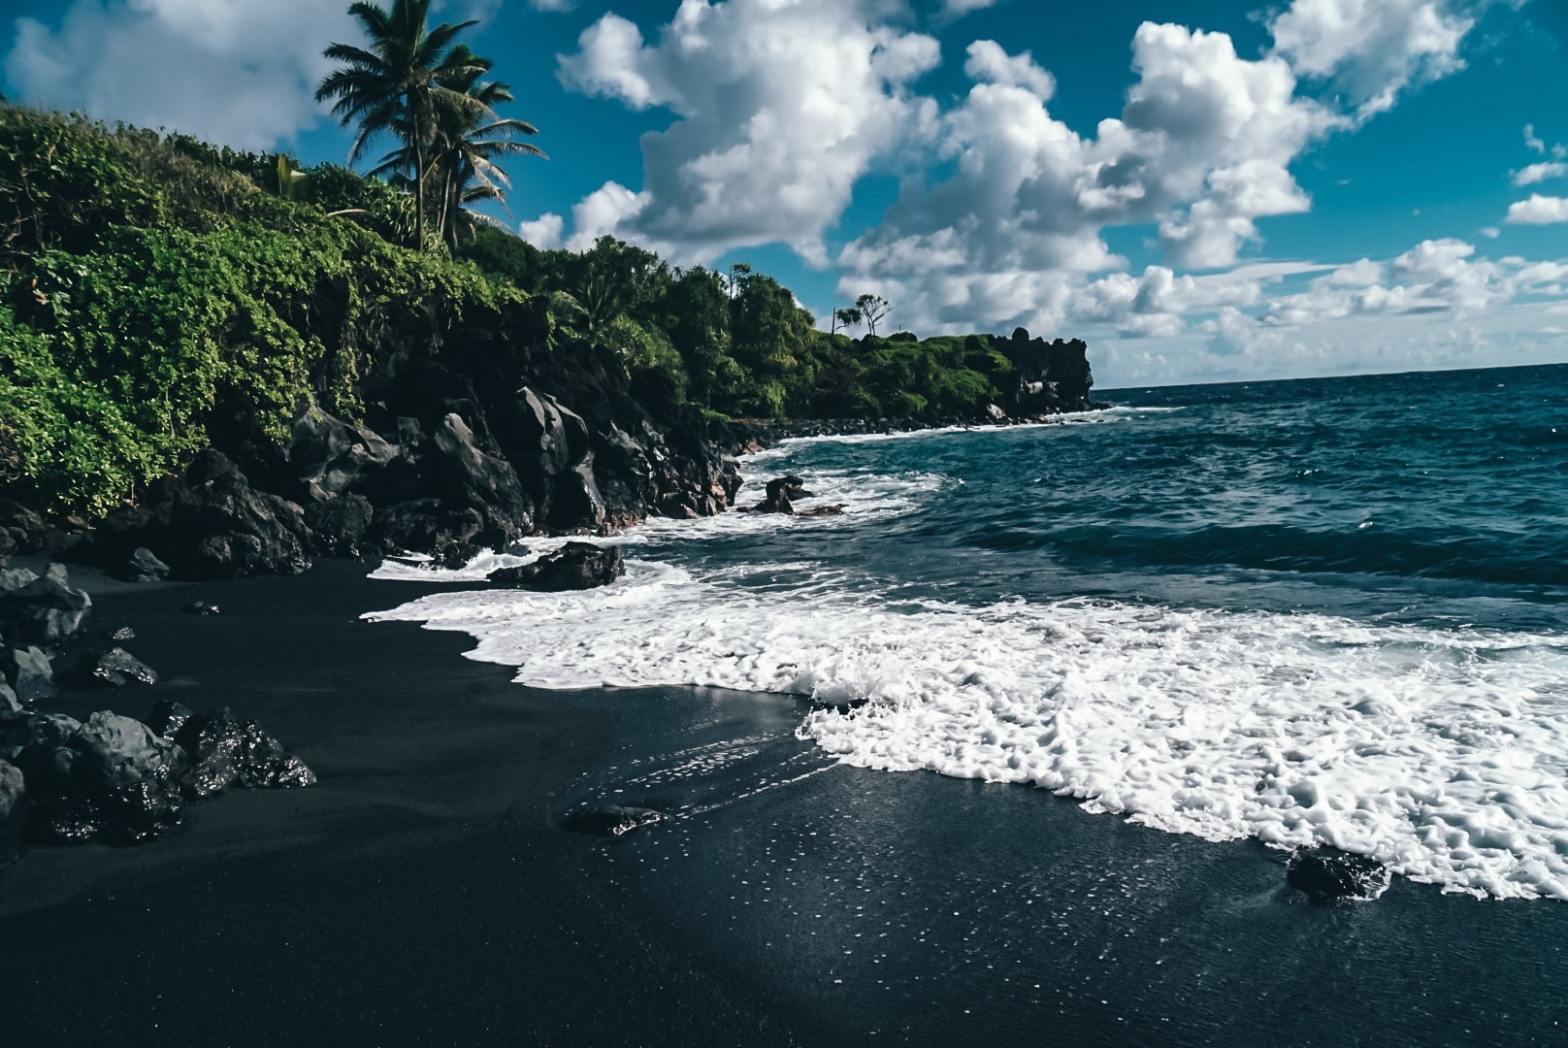 View from on the sand of a black sand beach out to the water